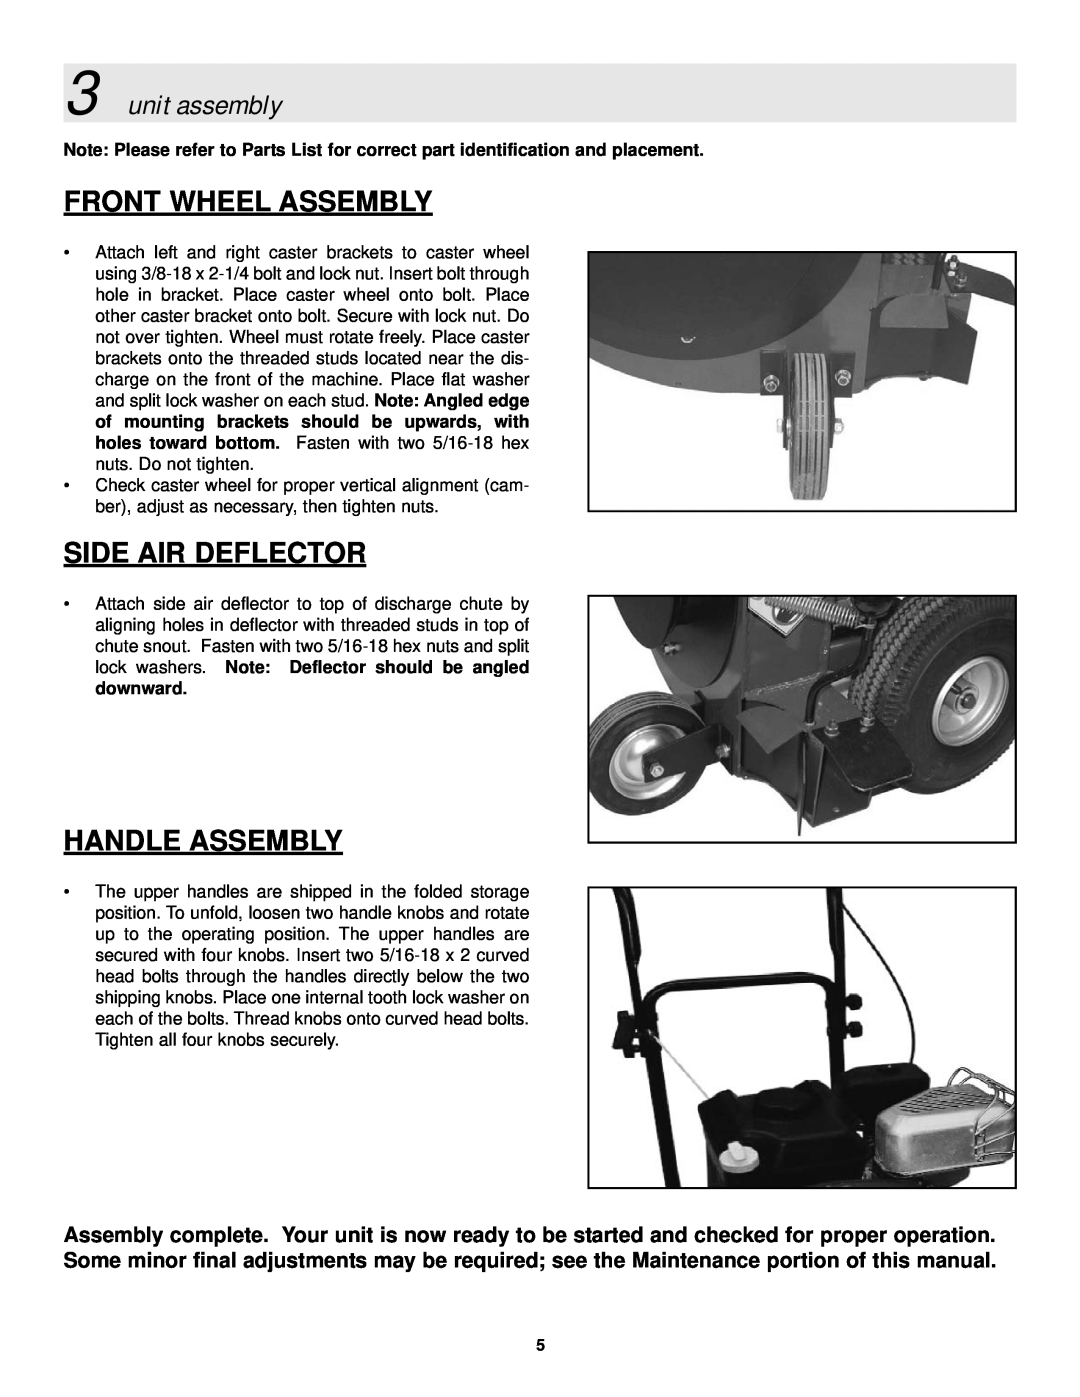 Snapper ELBC6151BV manual Front Wheel Assembly, Side Air Deflector, Handle Assembly, unit assembly 